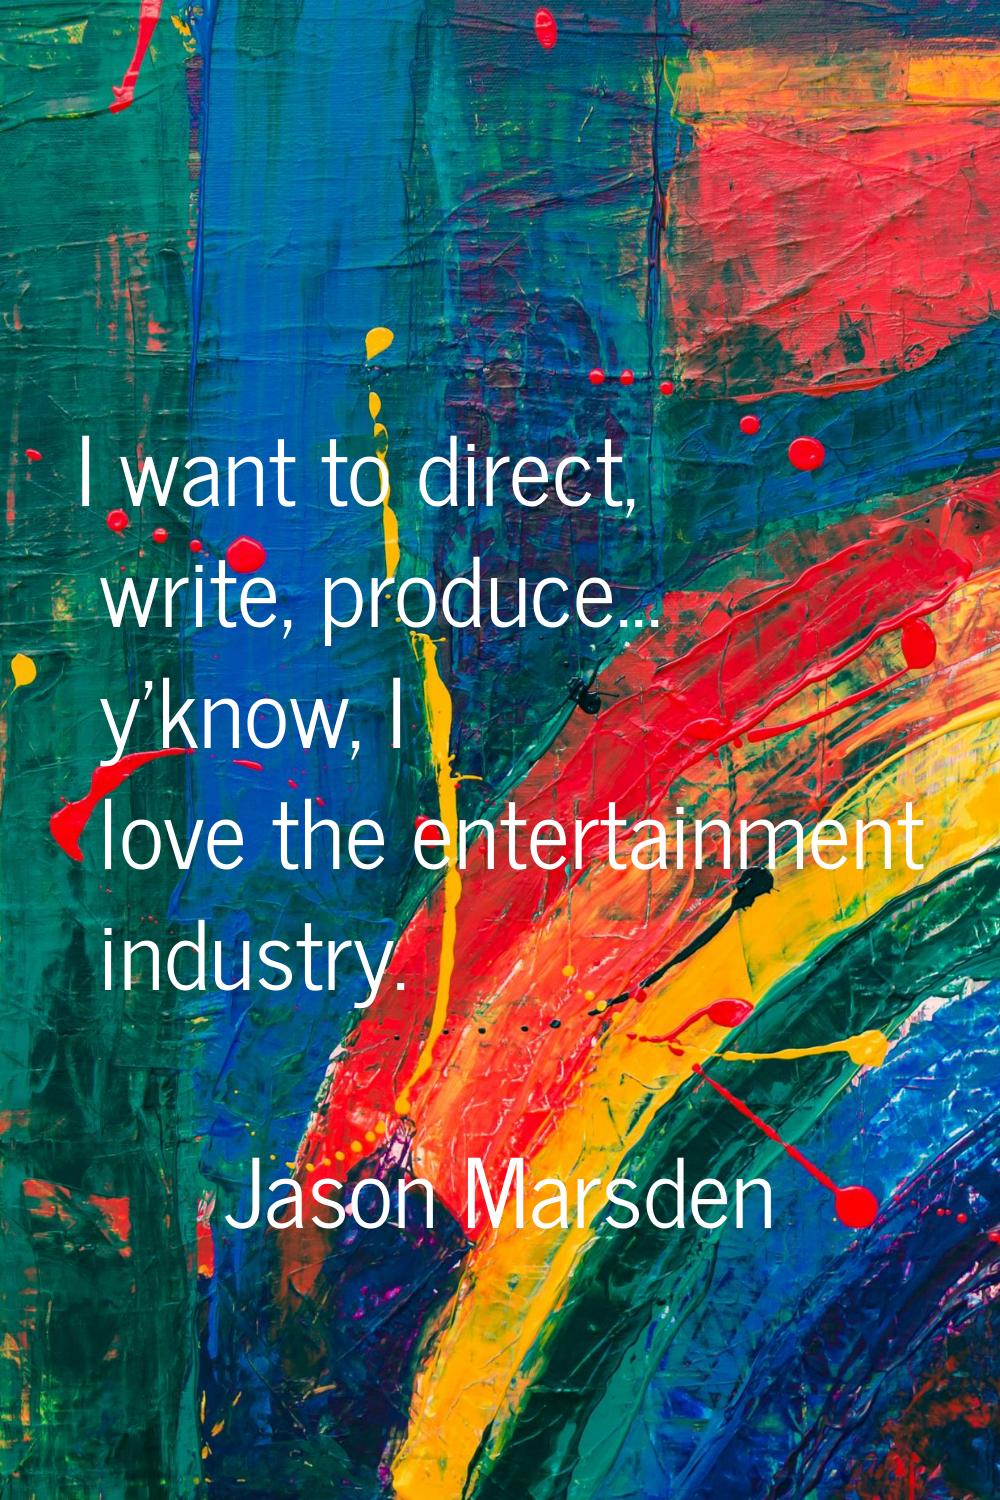 I want to direct, write, produce... y'know, I love the entertainment industry.